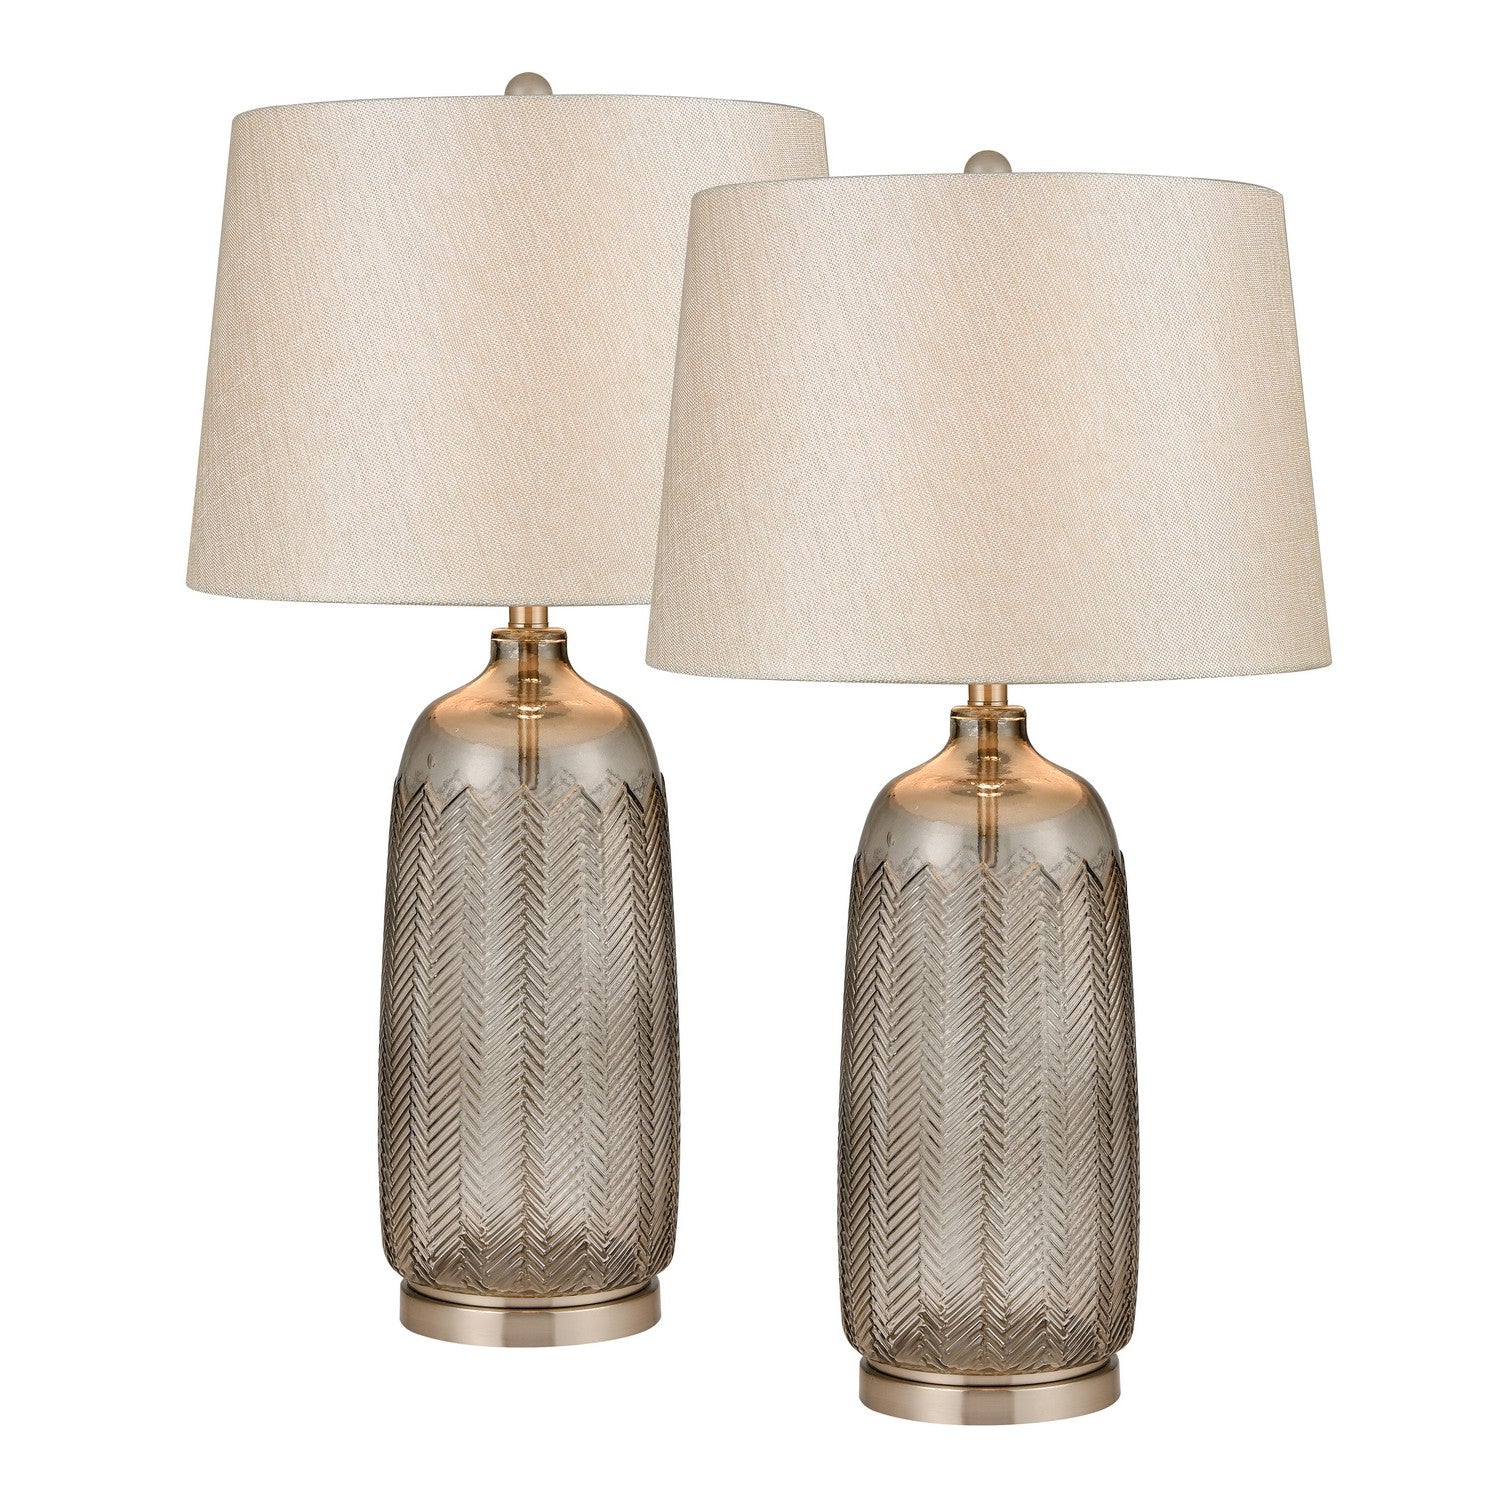 ELK Home - S0019-9481/S2 - One Light Table Lamp - Set of 2 - Lupin - Gray